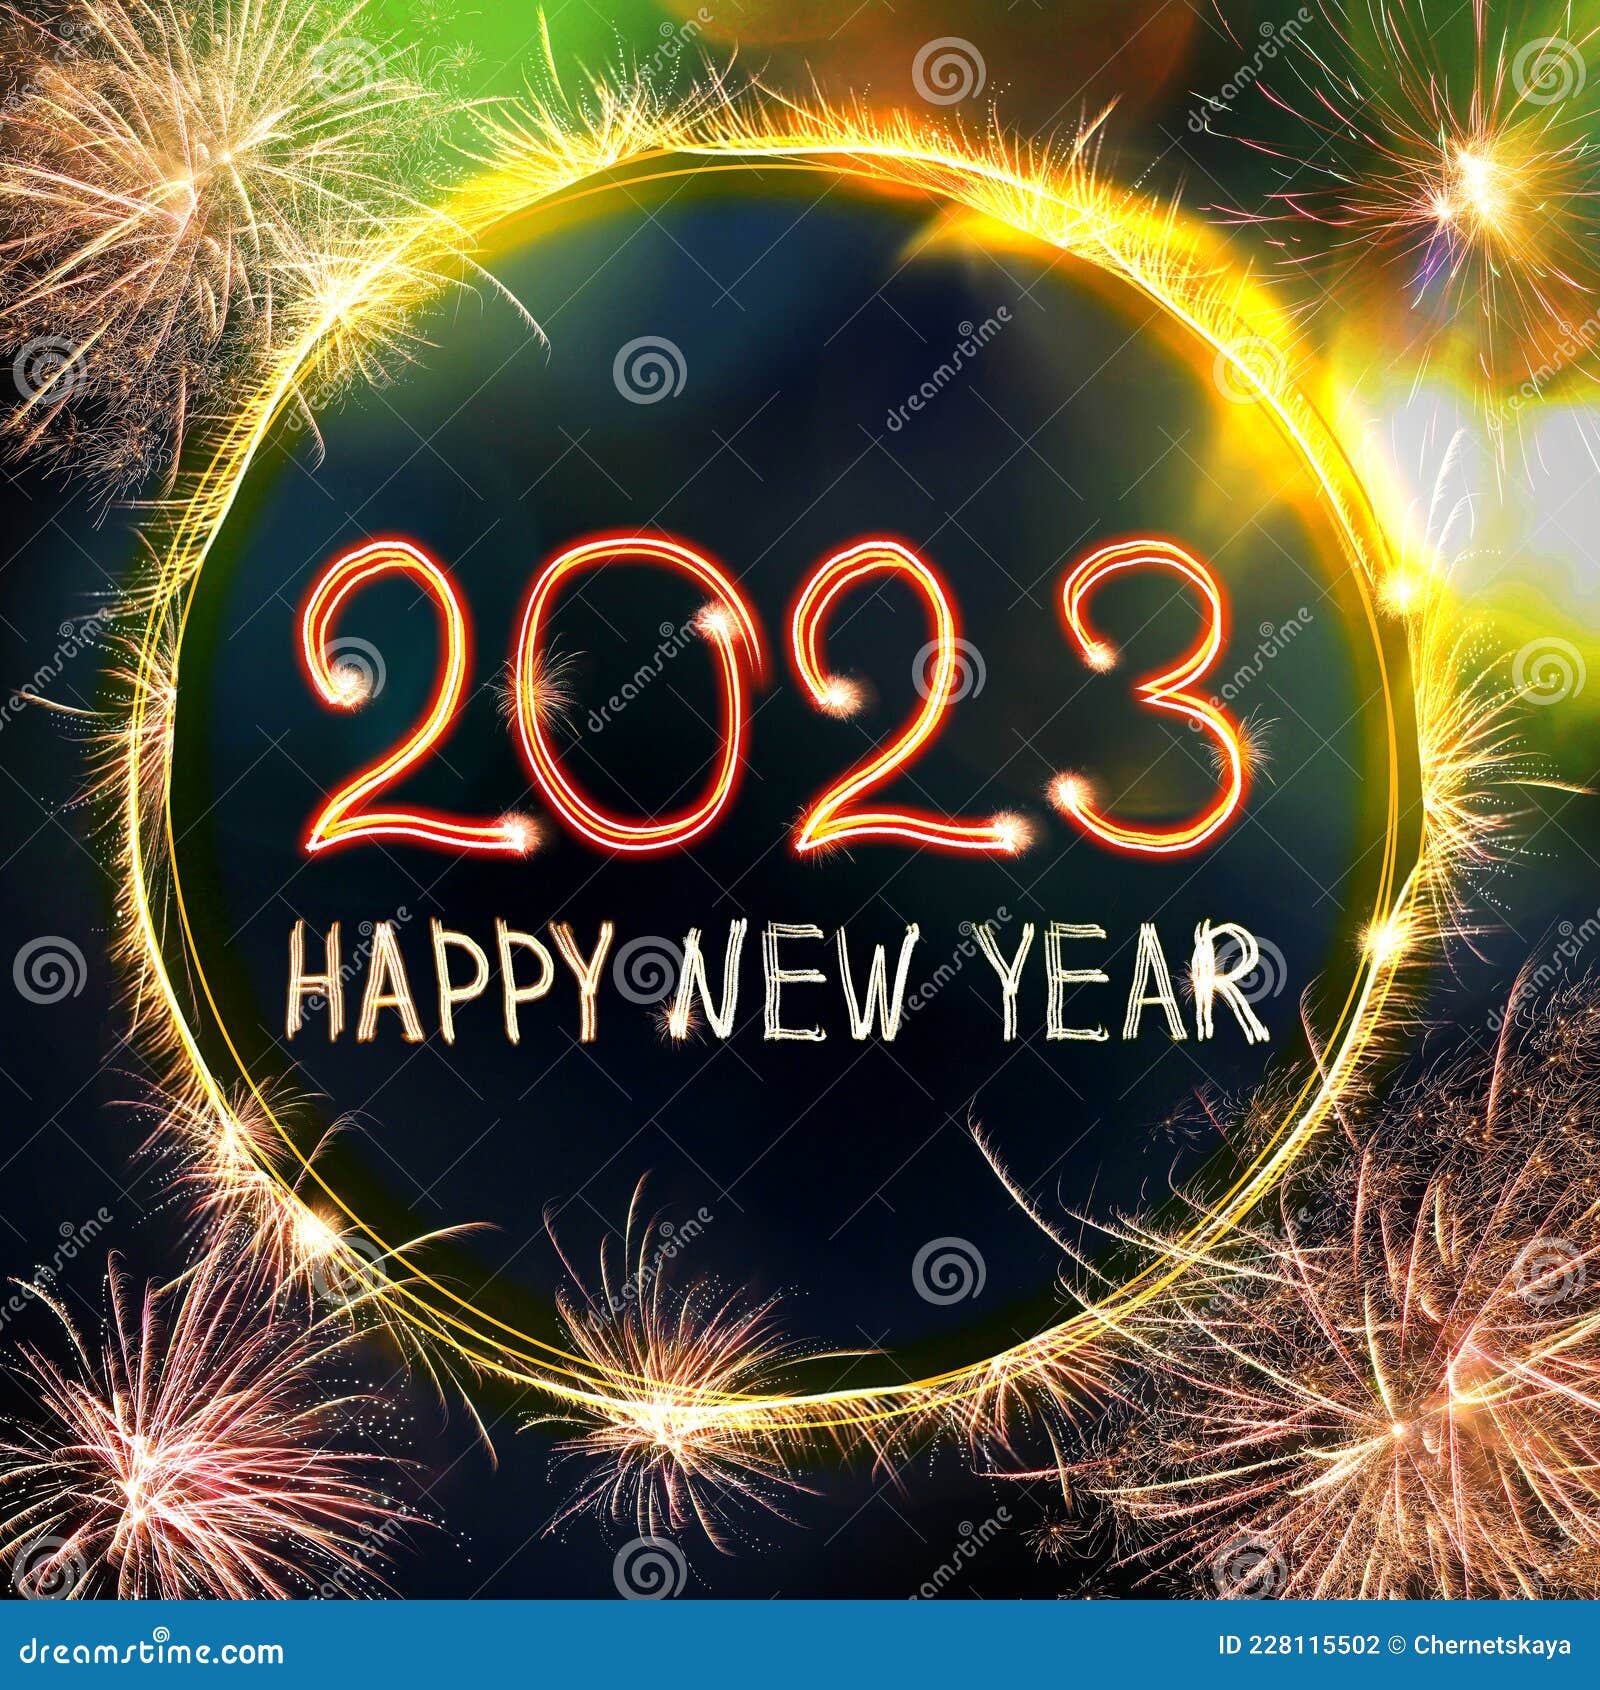 Bright Text Happy New 2023 Year Made Of Firework On Dark Background Greeting Card Design Stock Photo Image Of December Gold 228115502